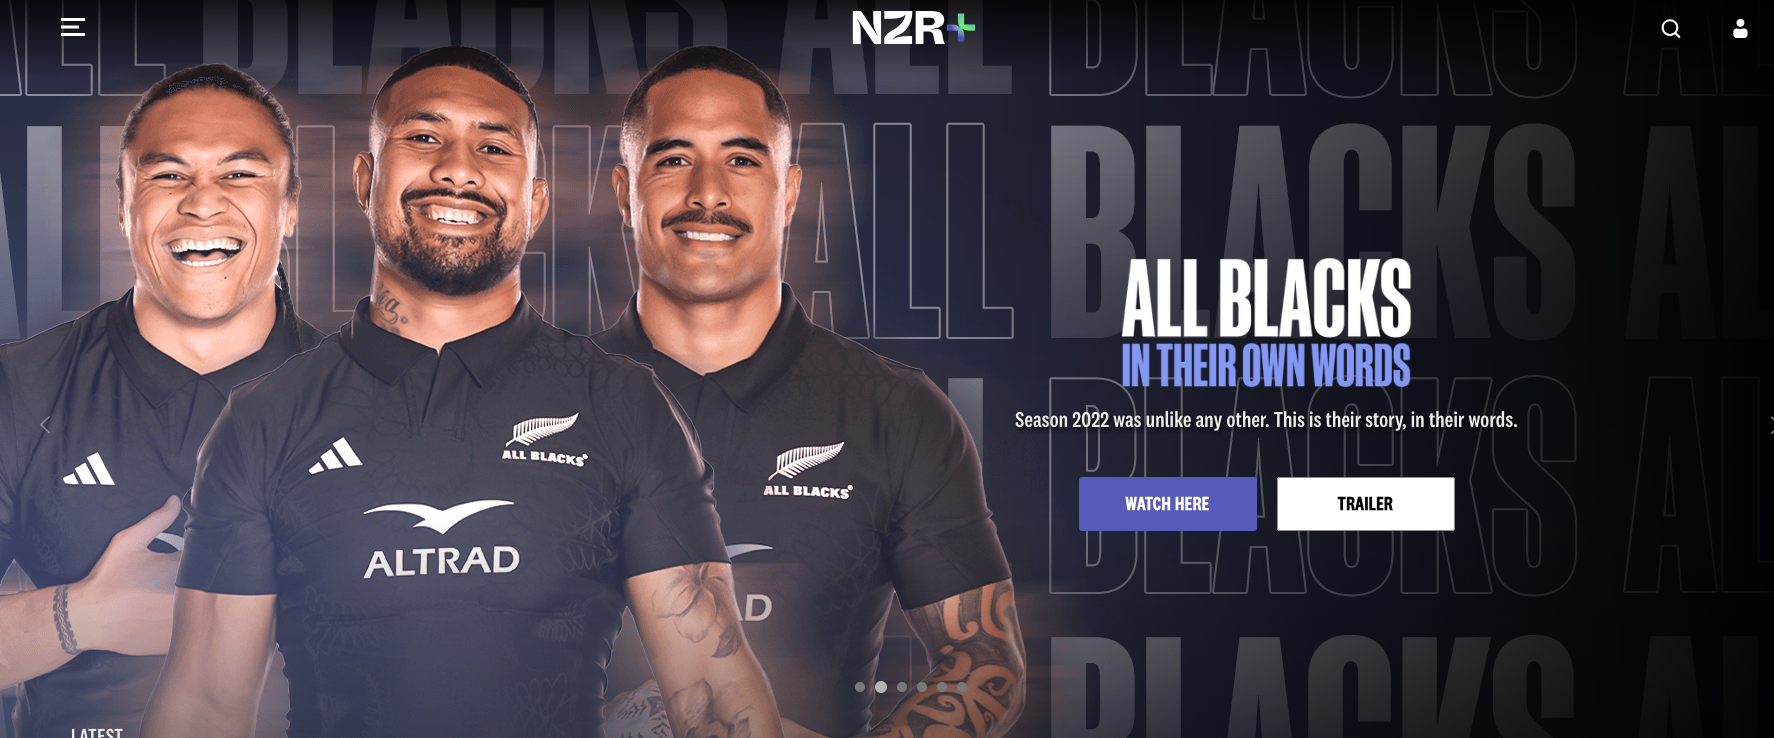 new zealand rugby live streaming free